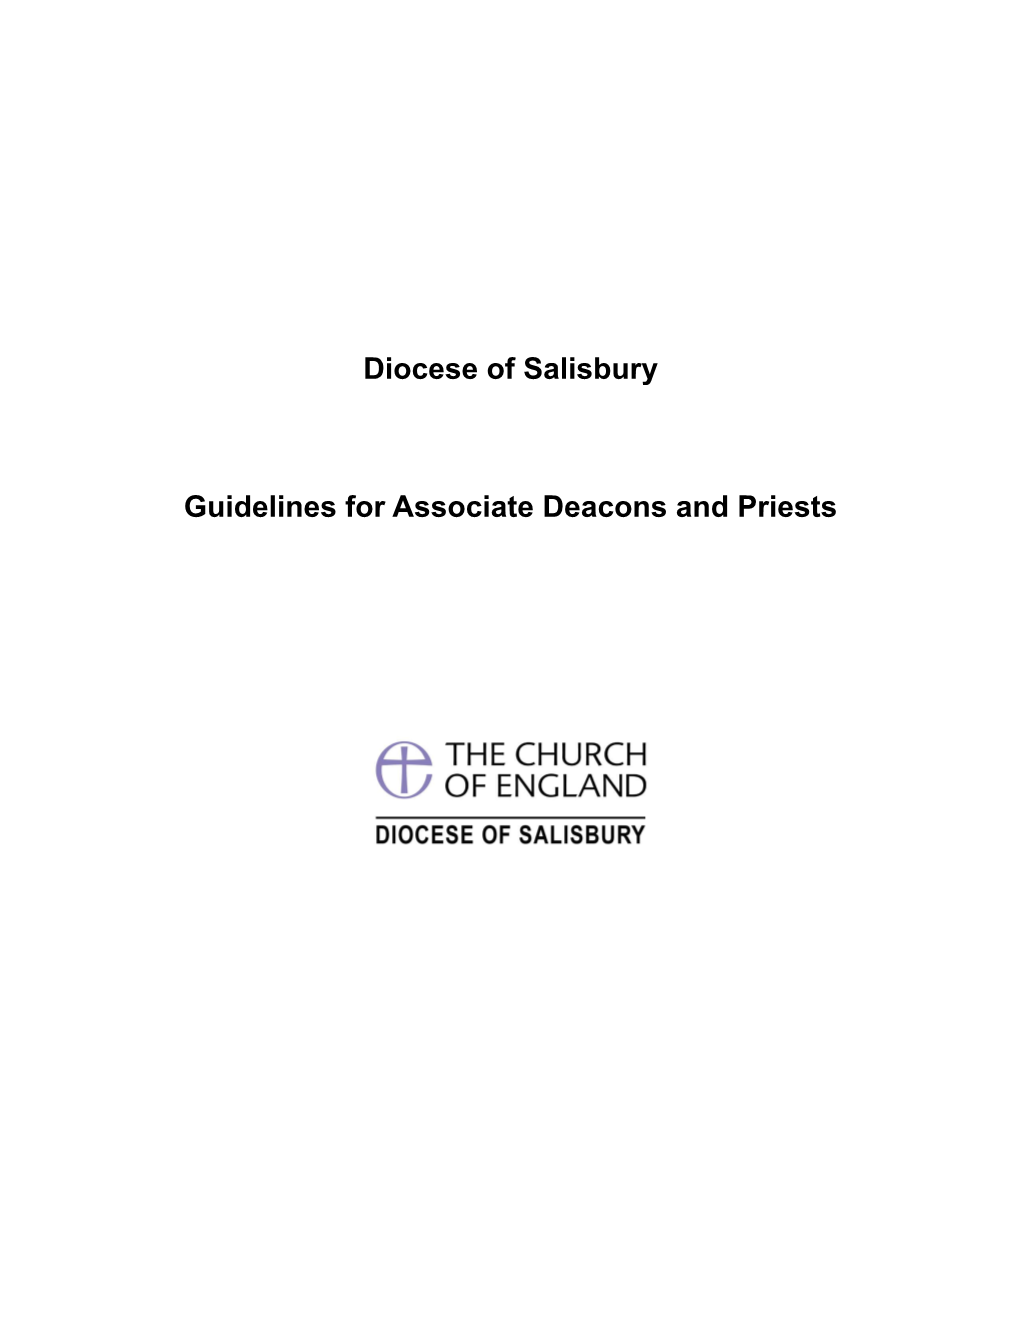 Guidelines for Associate Deacons and Priests